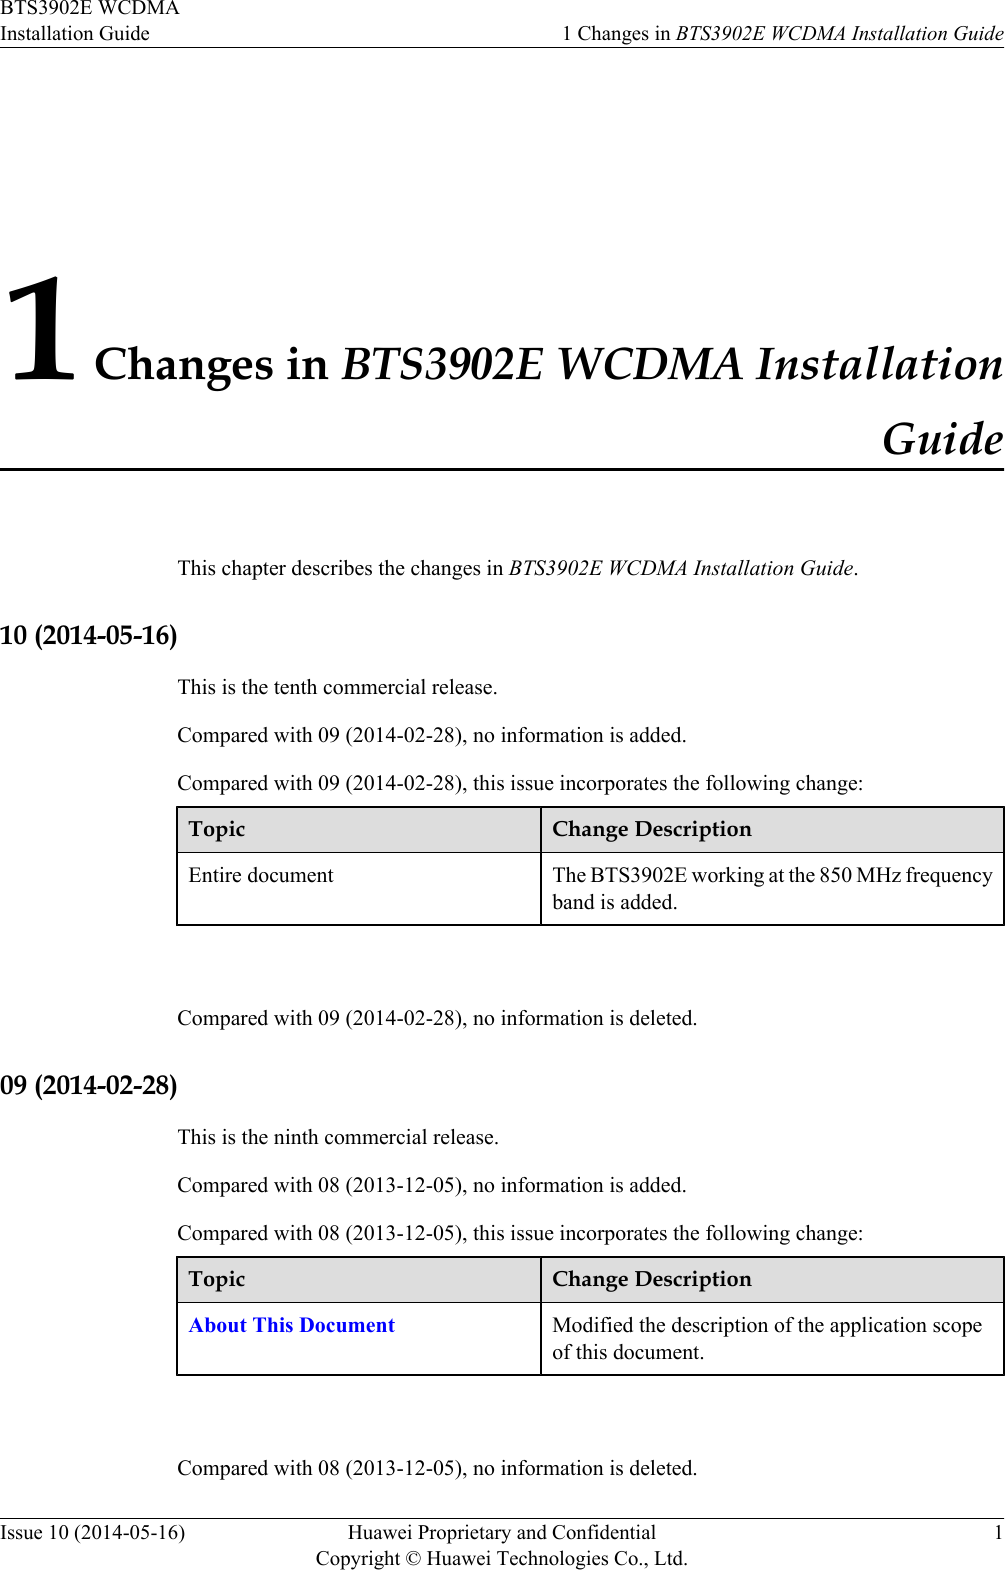 1 Changes in BTS3902E WCDMA InstallationGuideThis chapter describes the changes in BTS3902E WCDMA Installation Guide.10 (2014-05-16)This is the tenth commercial release.Compared with 09 (2014-02-28), no information is added.Compared with 09 (2014-02-28), this issue incorporates the following change:Topic Change DescriptionEntire document The BTS3902E working at the 850 MHz frequencyband is added. Compared with 09 (2014-02-28), no information is deleted.09 (2014-02-28)This is the ninth commercial release.Compared with 08 (2013-12-05), no information is added.Compared with 08 (2013-12-05), this issue incorporates the following change:Topic Change DescriptionAbout This Document Modified the description of the application scopeof this document. Compared with 08 (2013-12-05), no information is deleted.BTS3902E WCDMAInstallation Guide 1 Changes in BTS3902E WCDMA Installation GuideIssue 10 (2014-05-16) Huawei Proprietary and ConfidentialCopyright © Huawei Technologies Co., Ltd.1